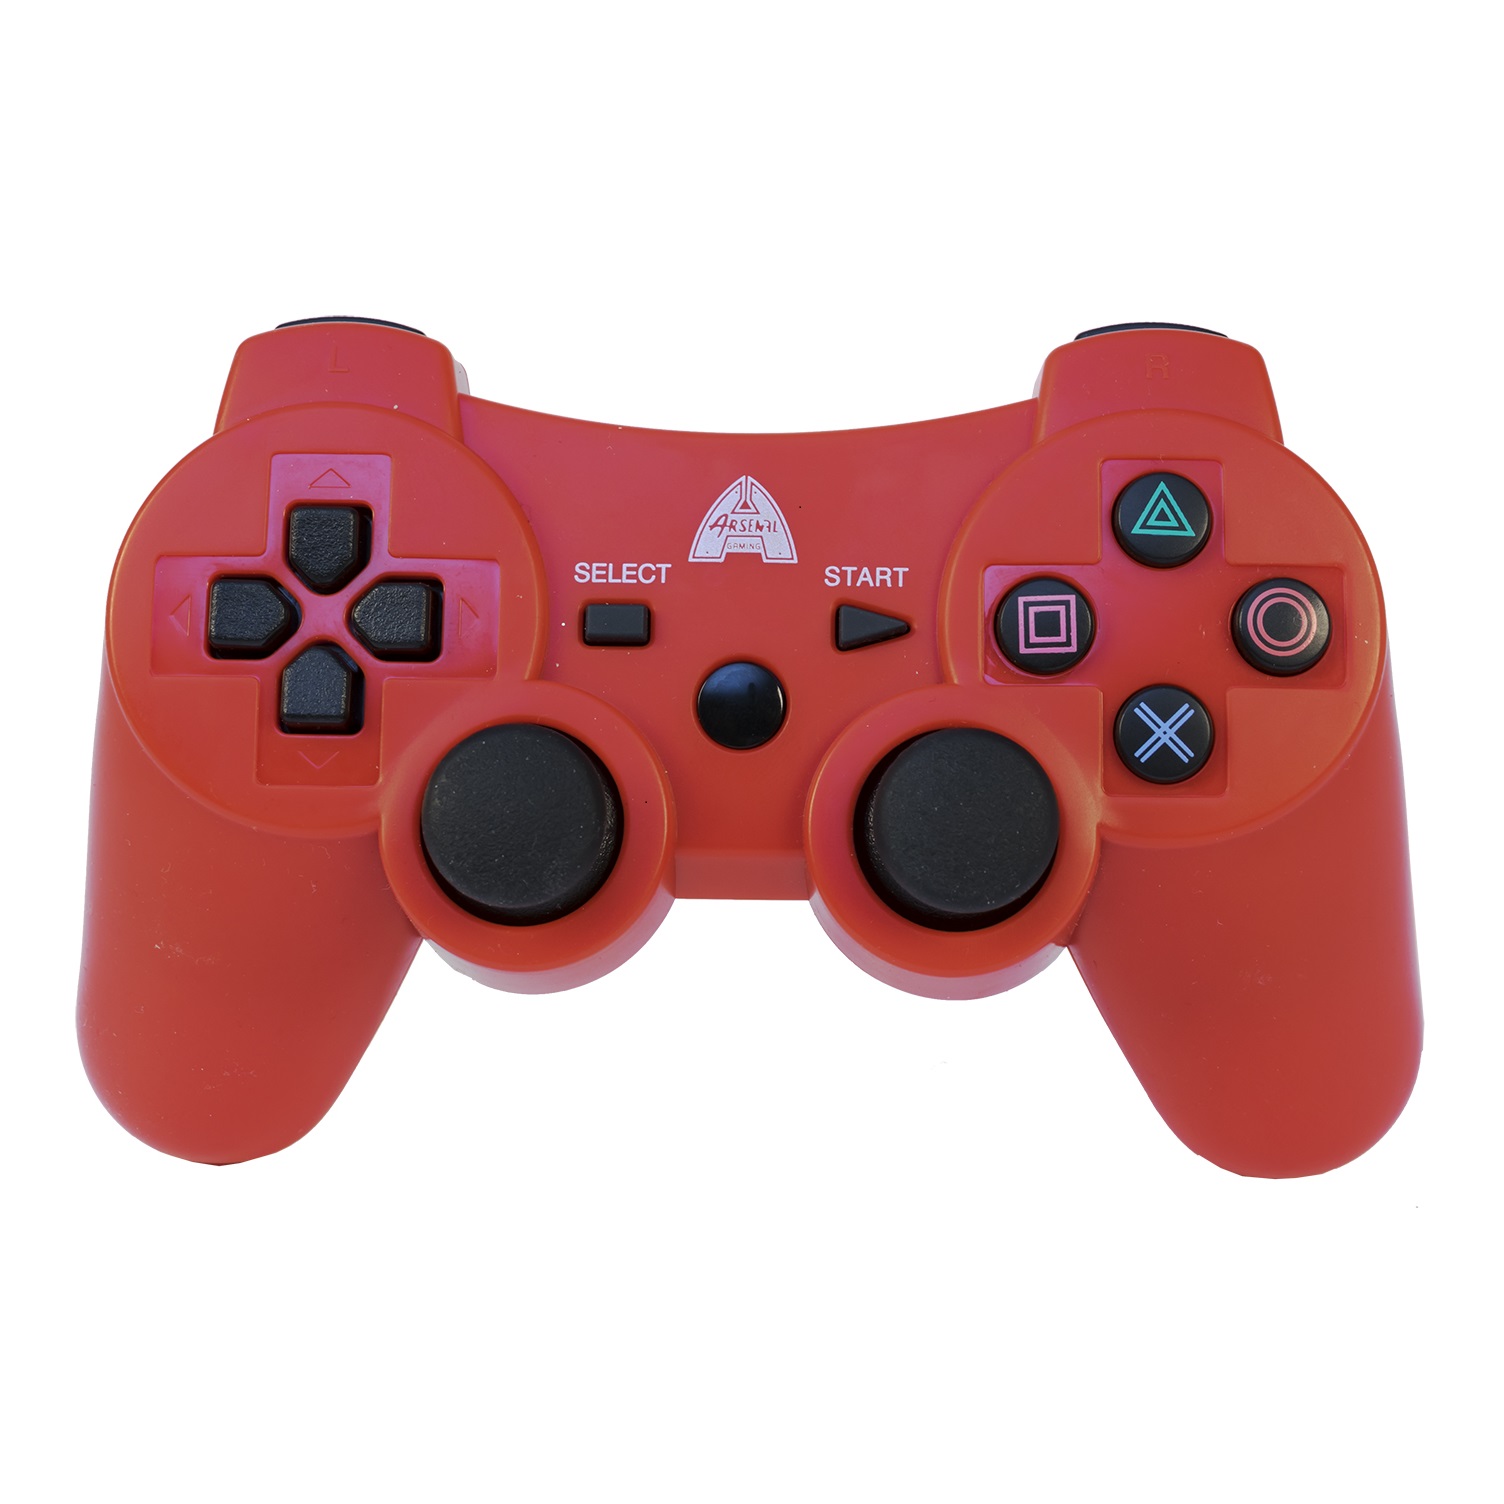 Arsenal Gaming PlayStation3 Wireless Rechargeable Bluetooth Controller, Red ap3con4r - image 1 of 2